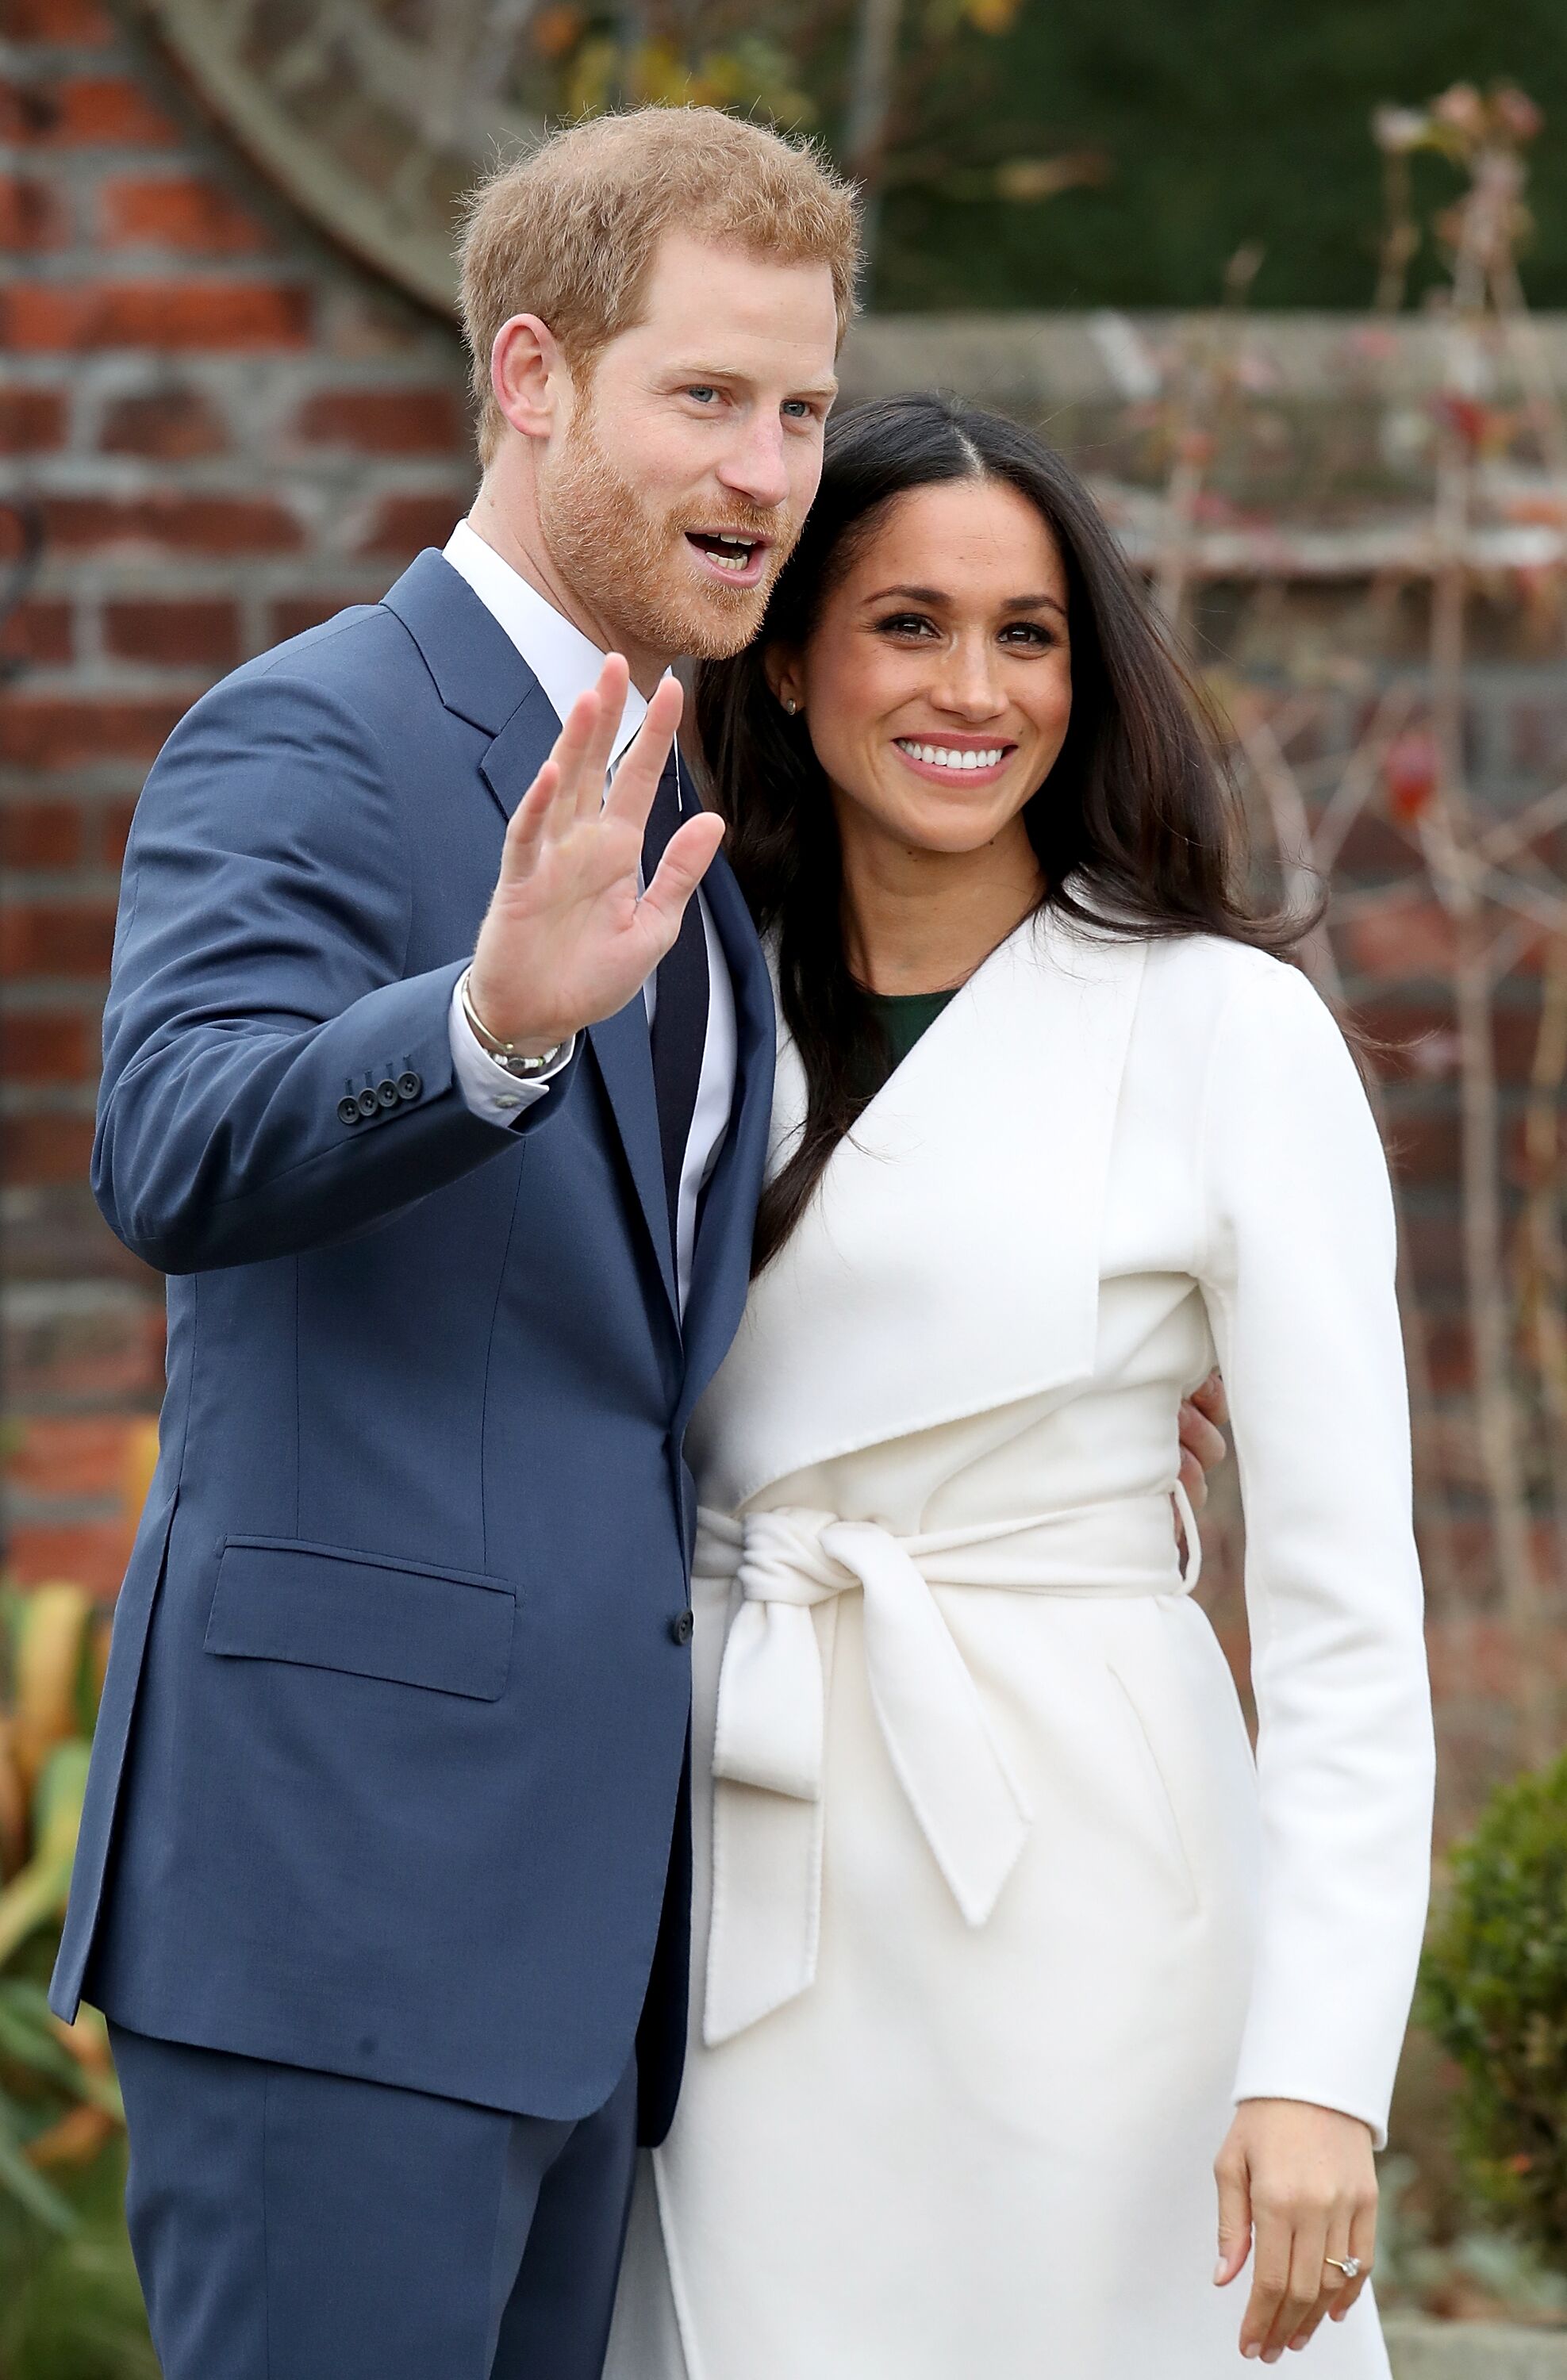  Prince Harry and actress Meghan Markle during an official photocall to announce their engagement at The Sunken Gardens at Kensington Palace | Photo: Getty Images